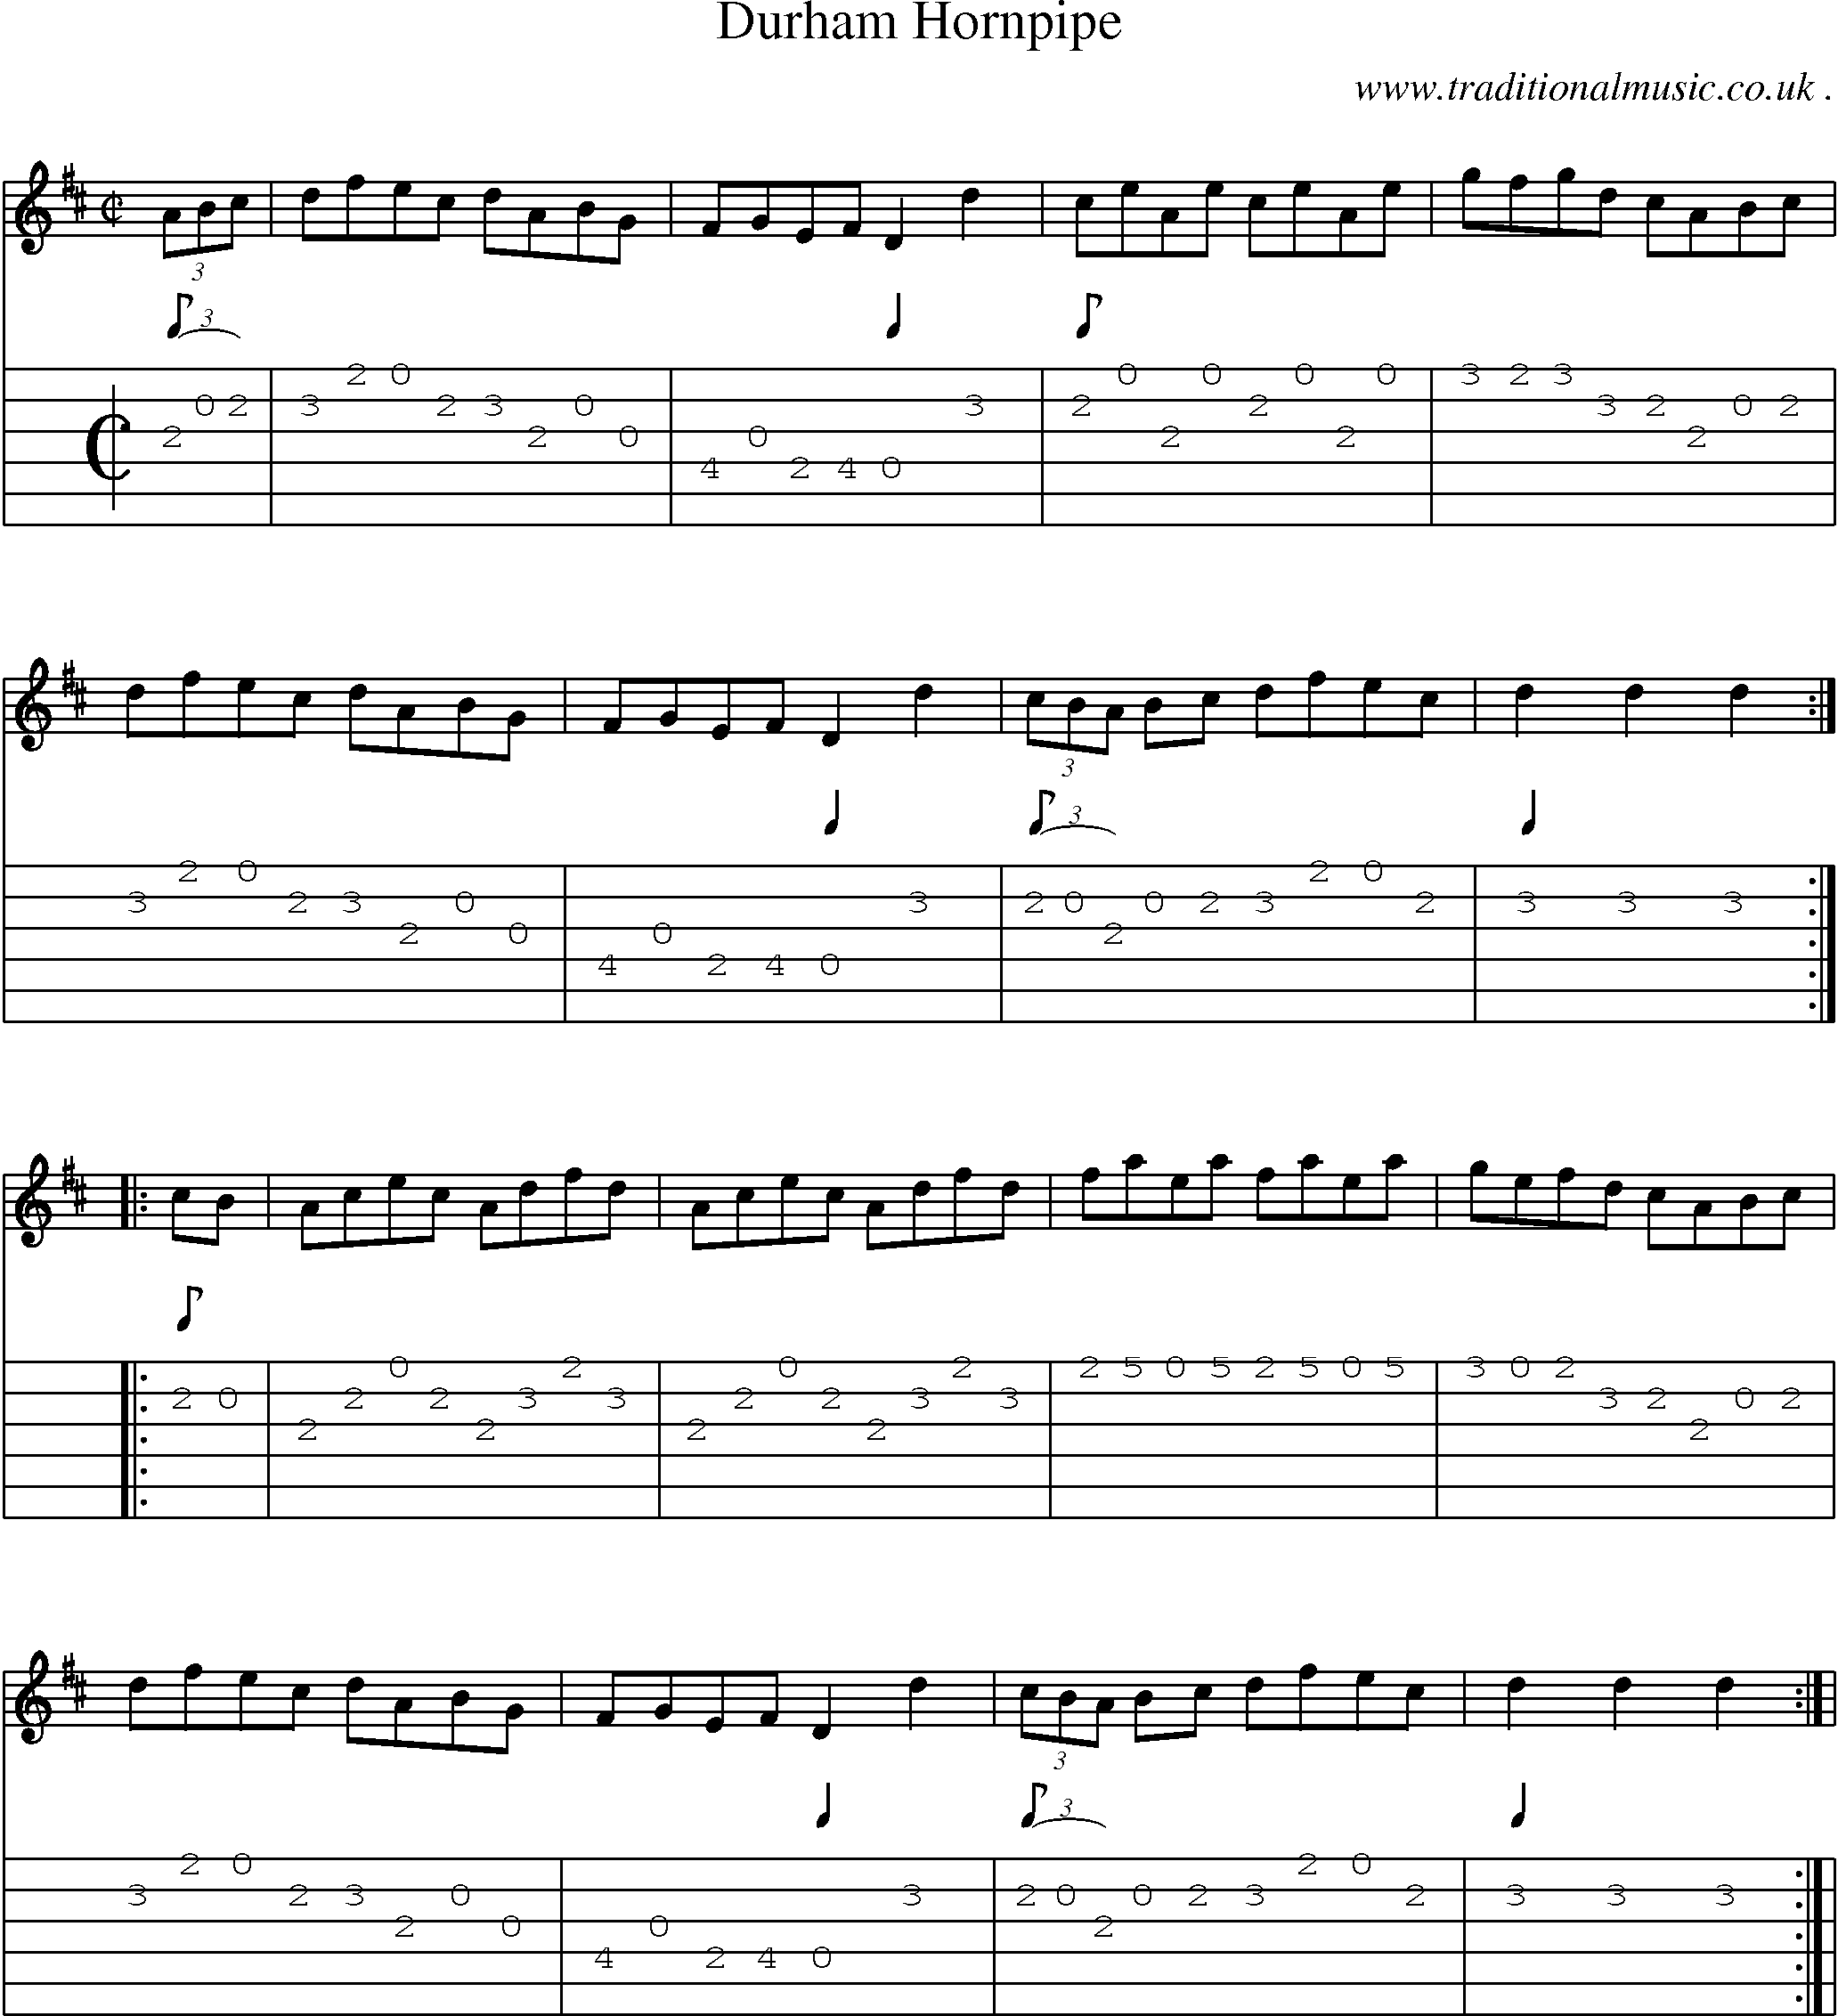 Sheet-Music and Guitar Tabs for Durham Hornpipe